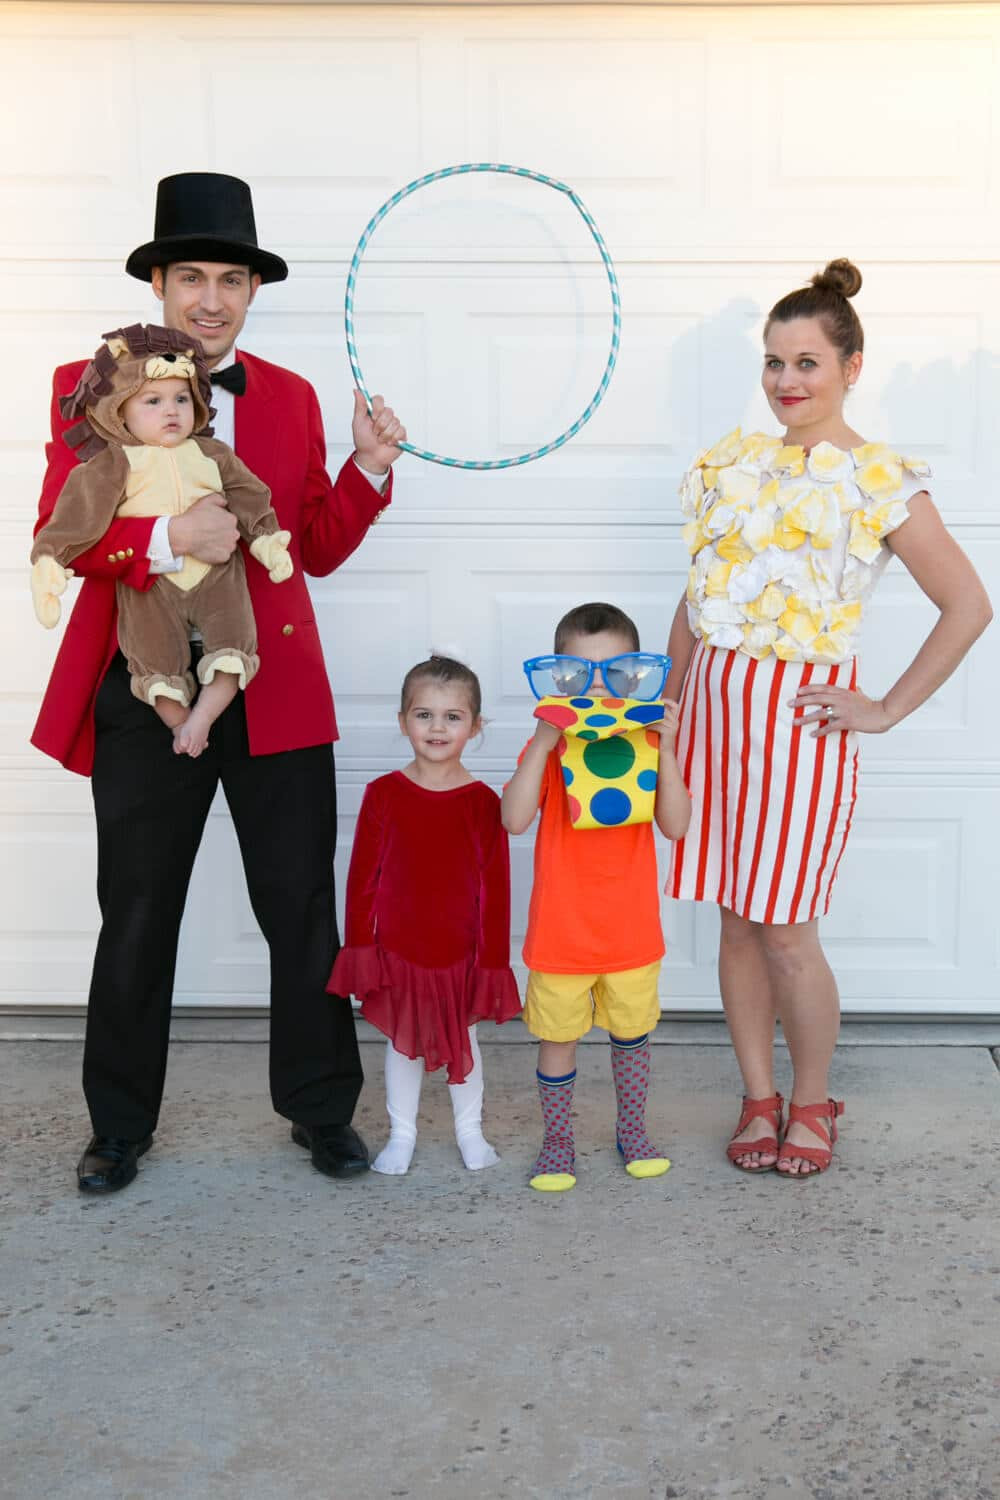 DIY Circus Costumes
 6 Awesome Family Halloween Costume Ideas For Under $30